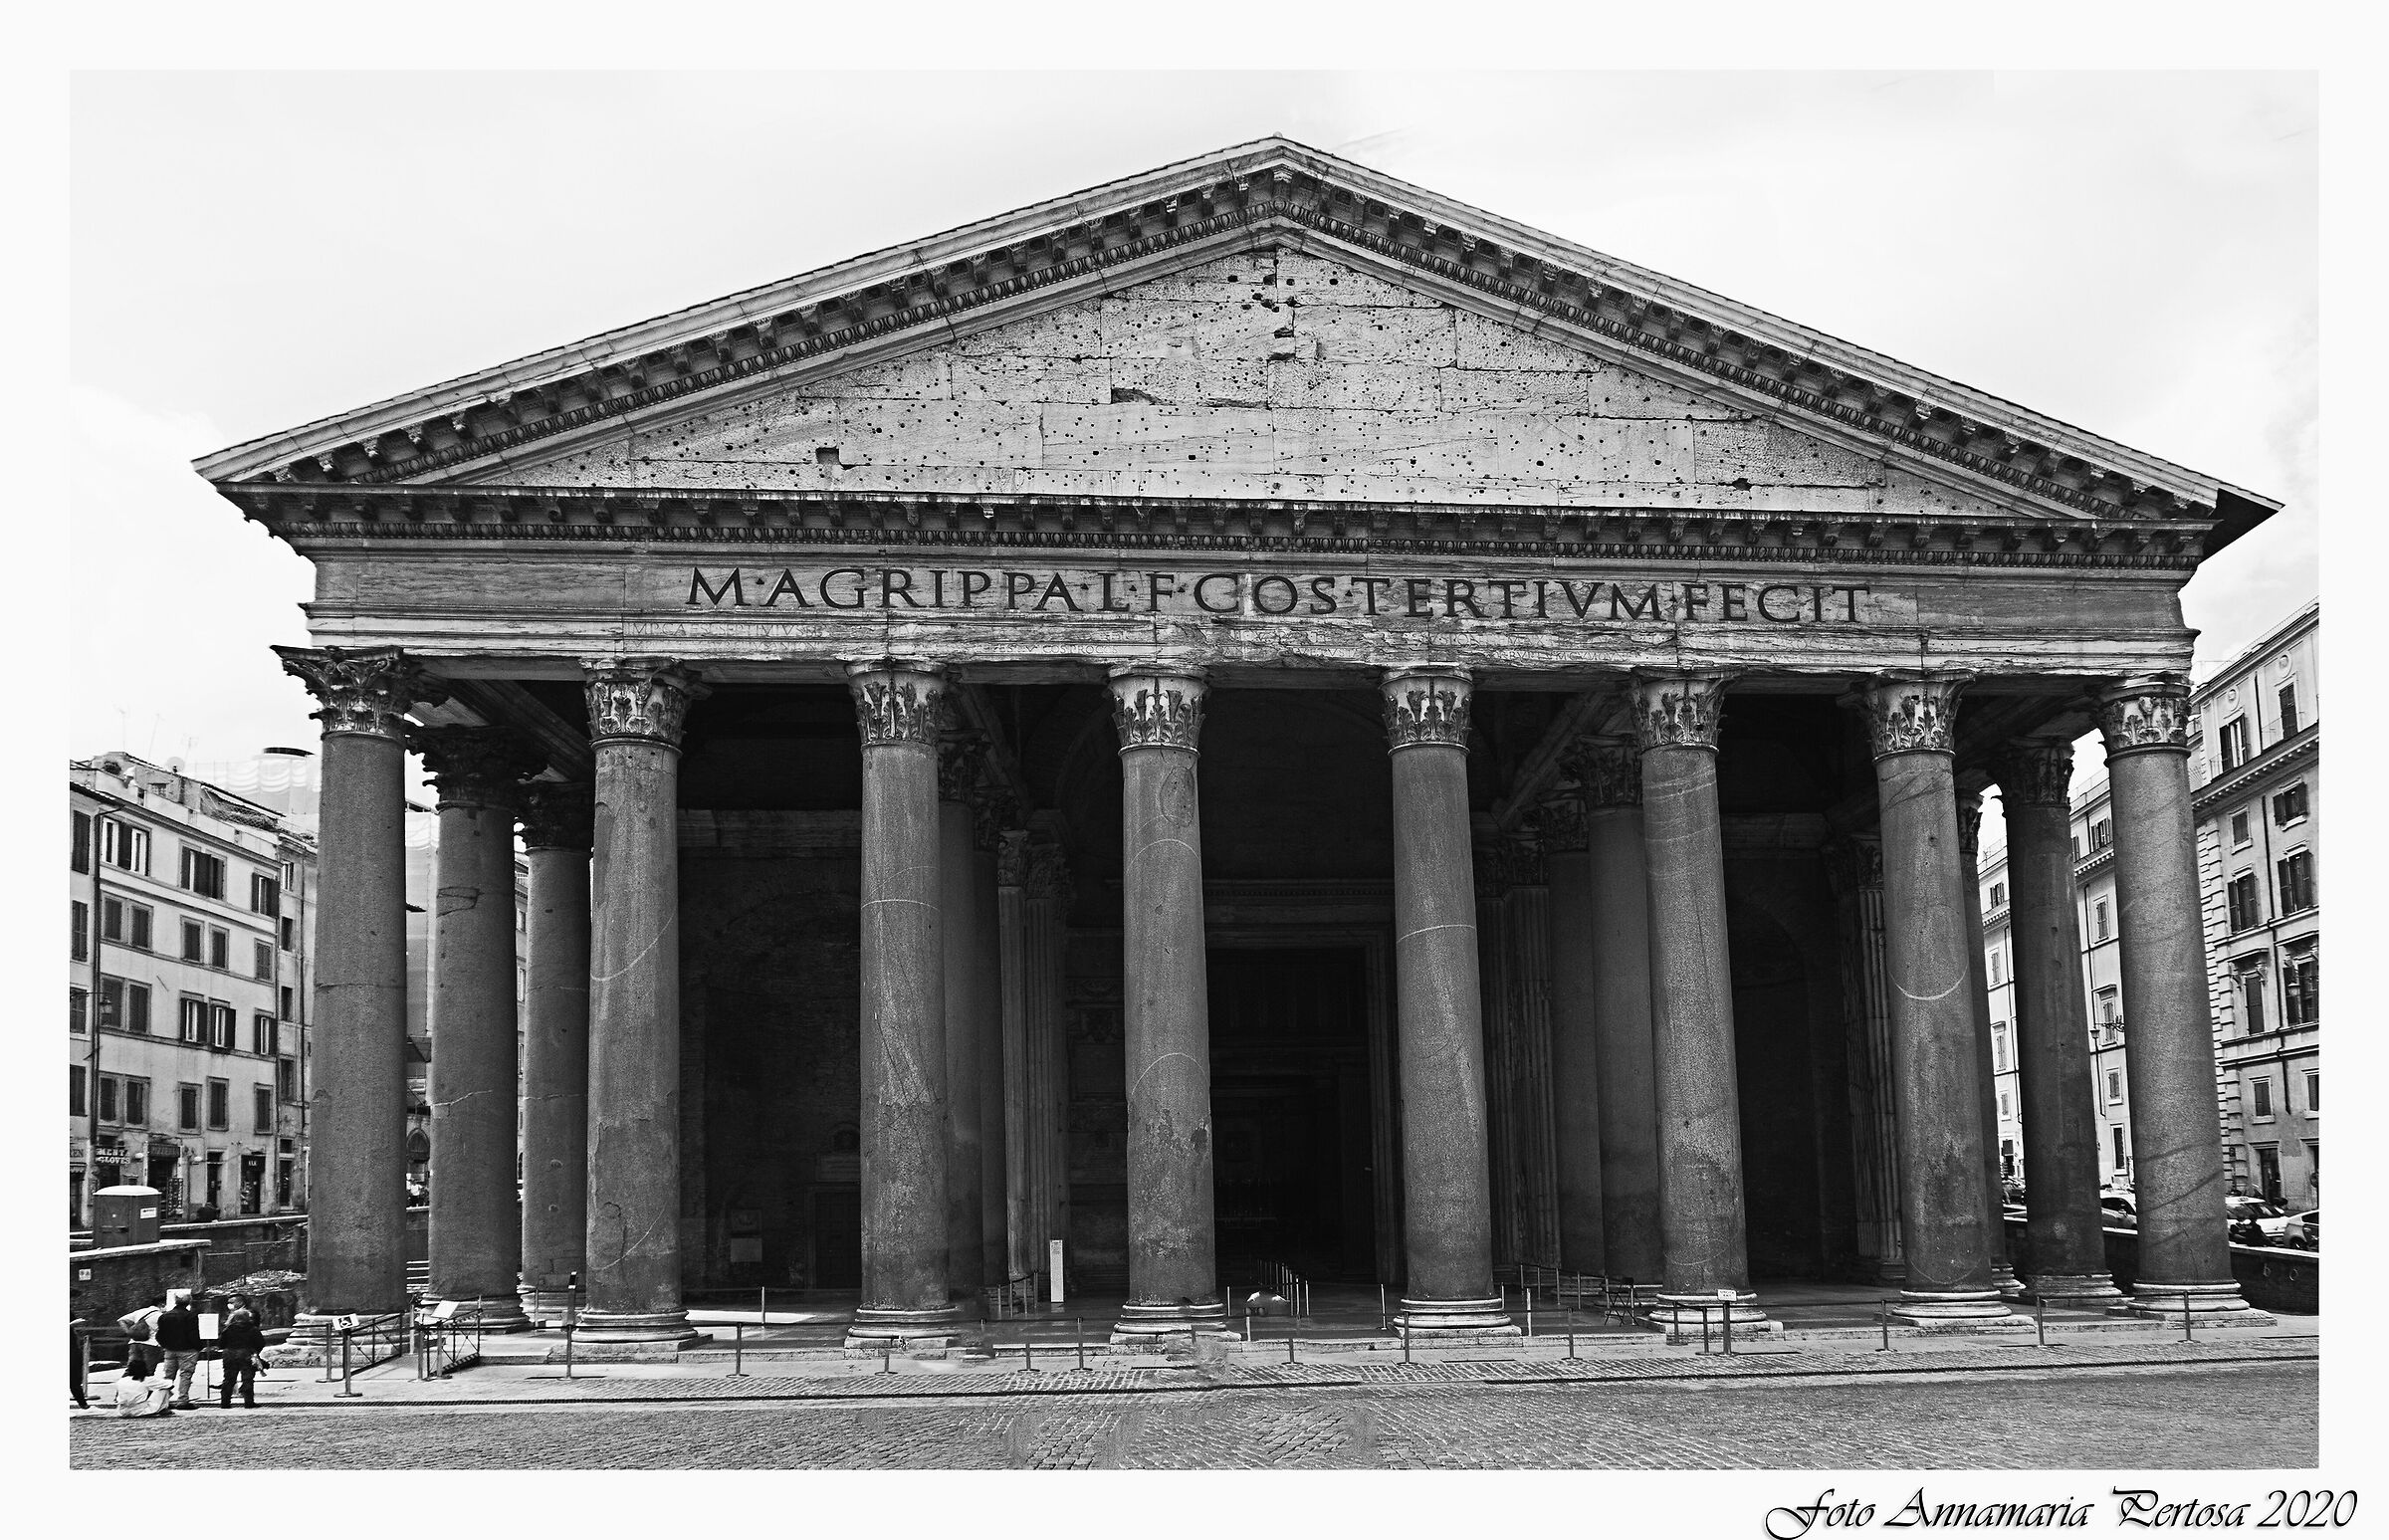 The Pantheon never again so deserted...